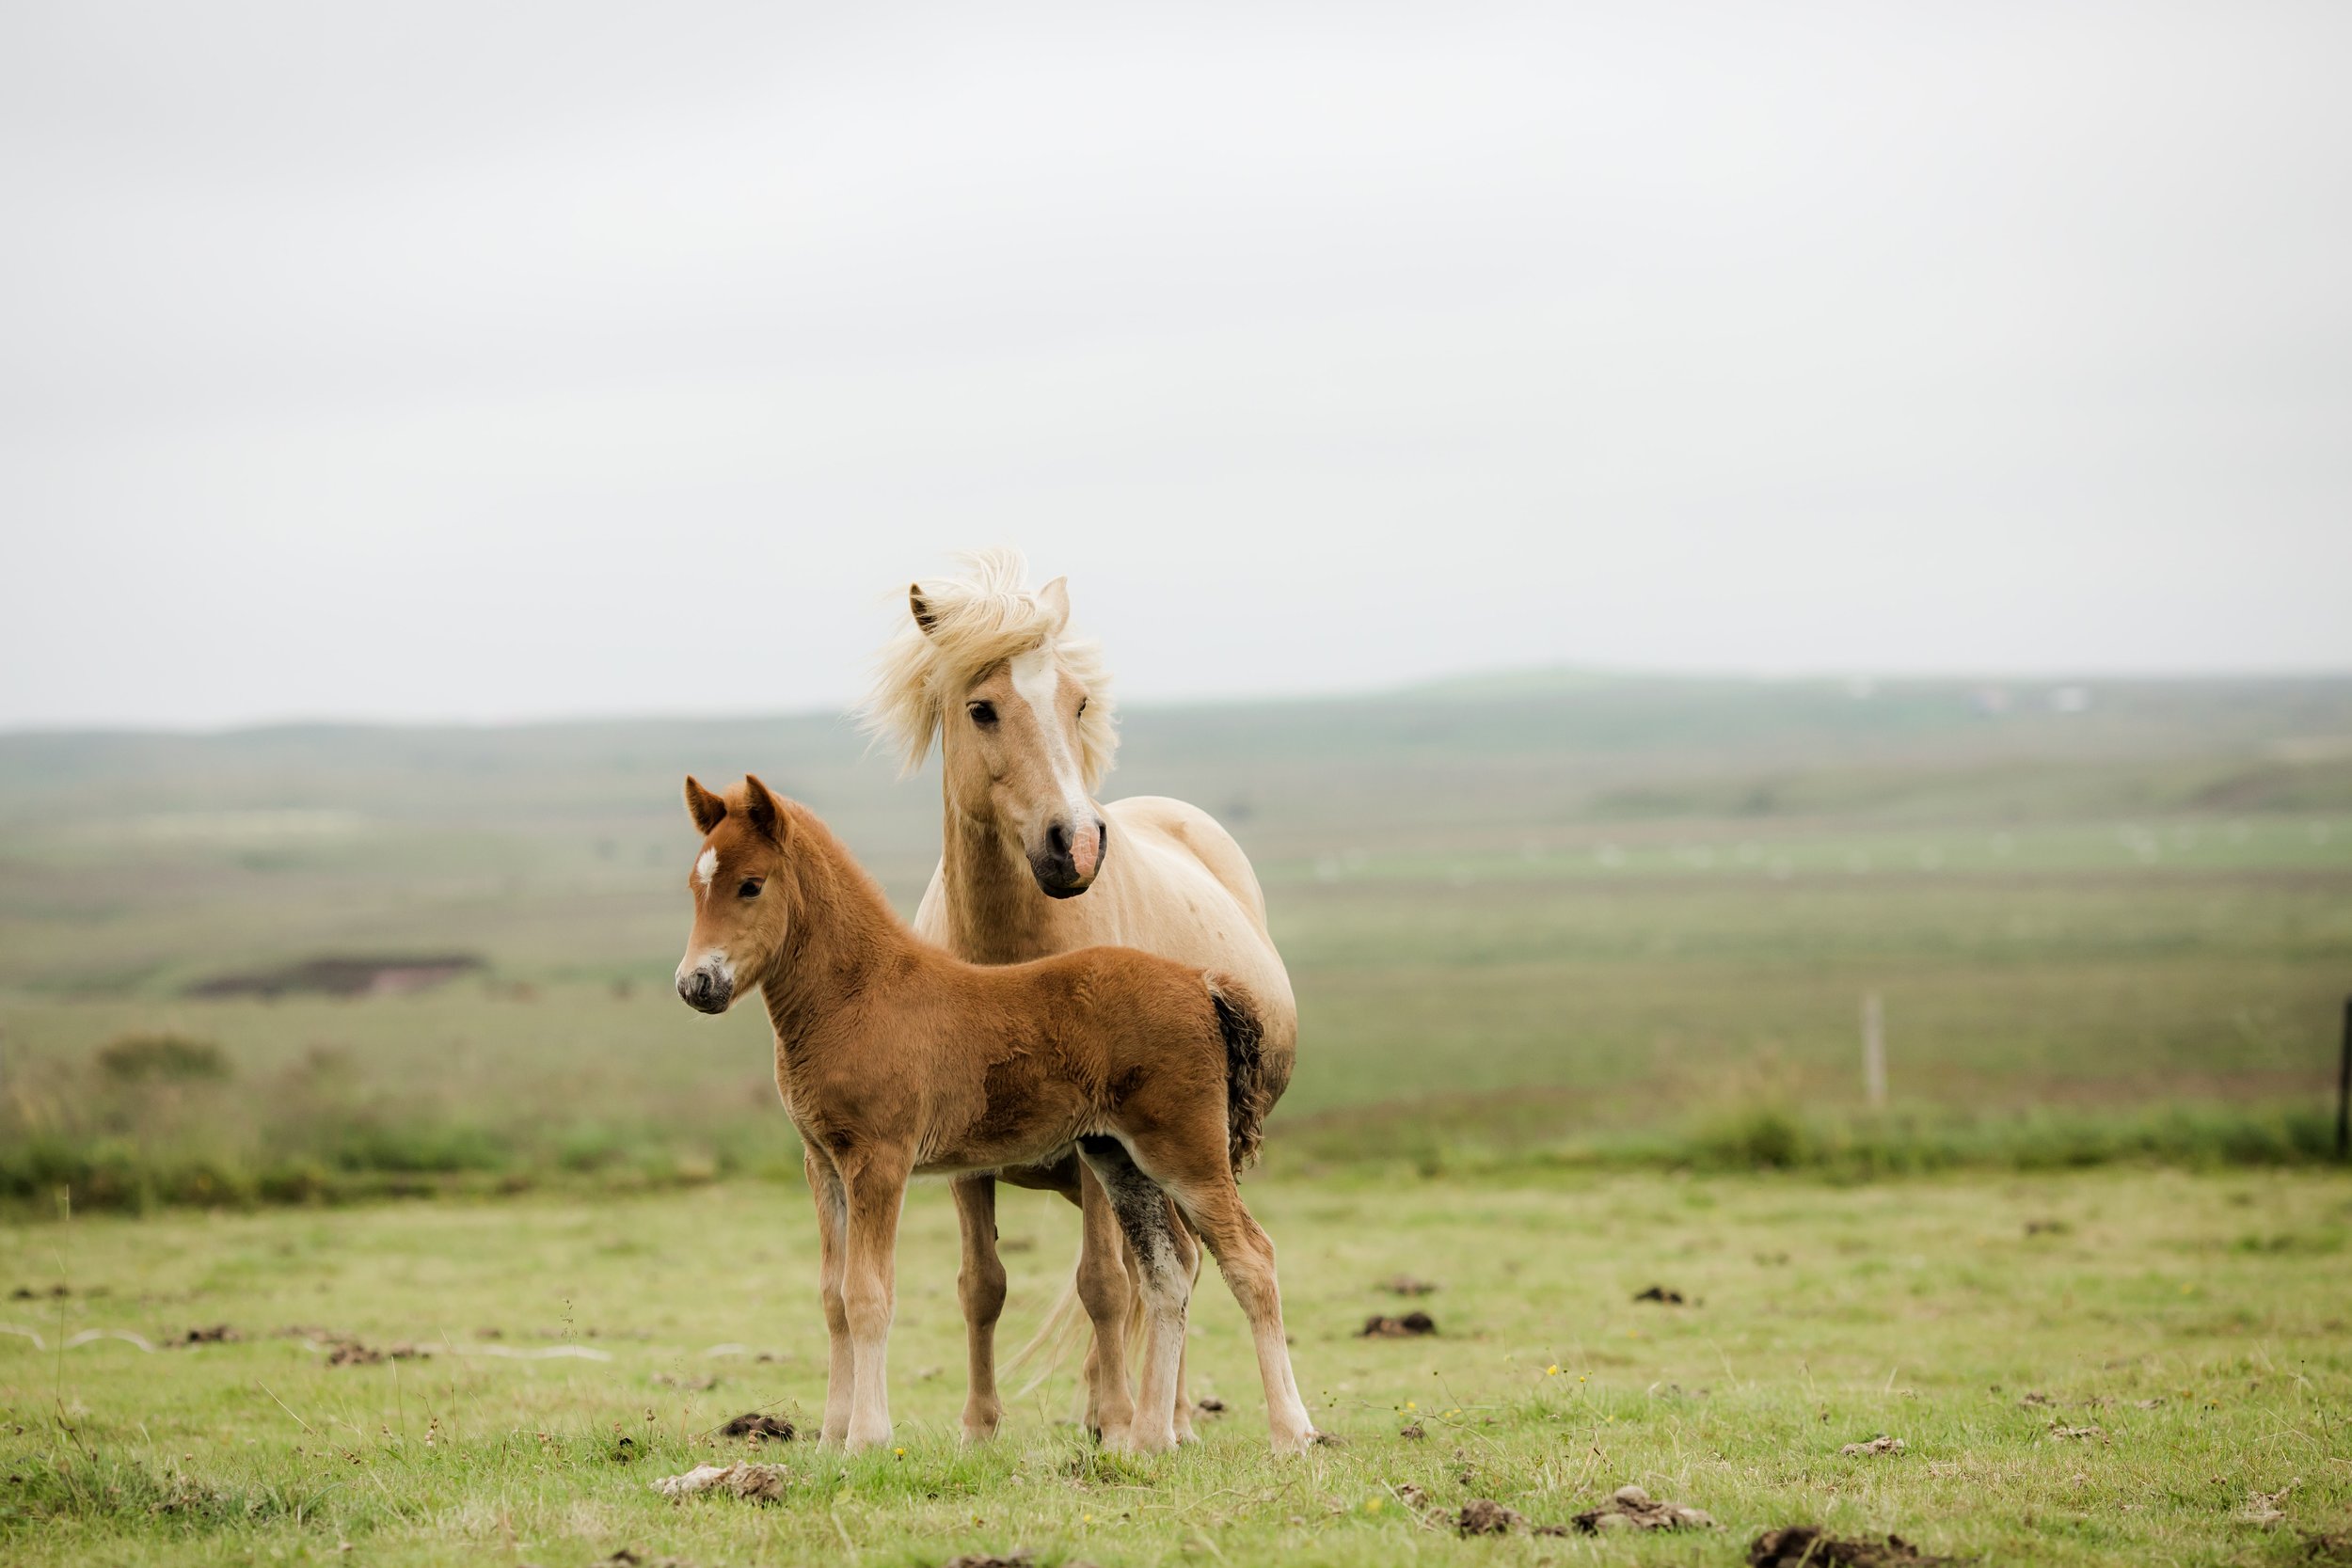 Horses in Iceland by Christina Swanson now on Cottage Hill62.jpg